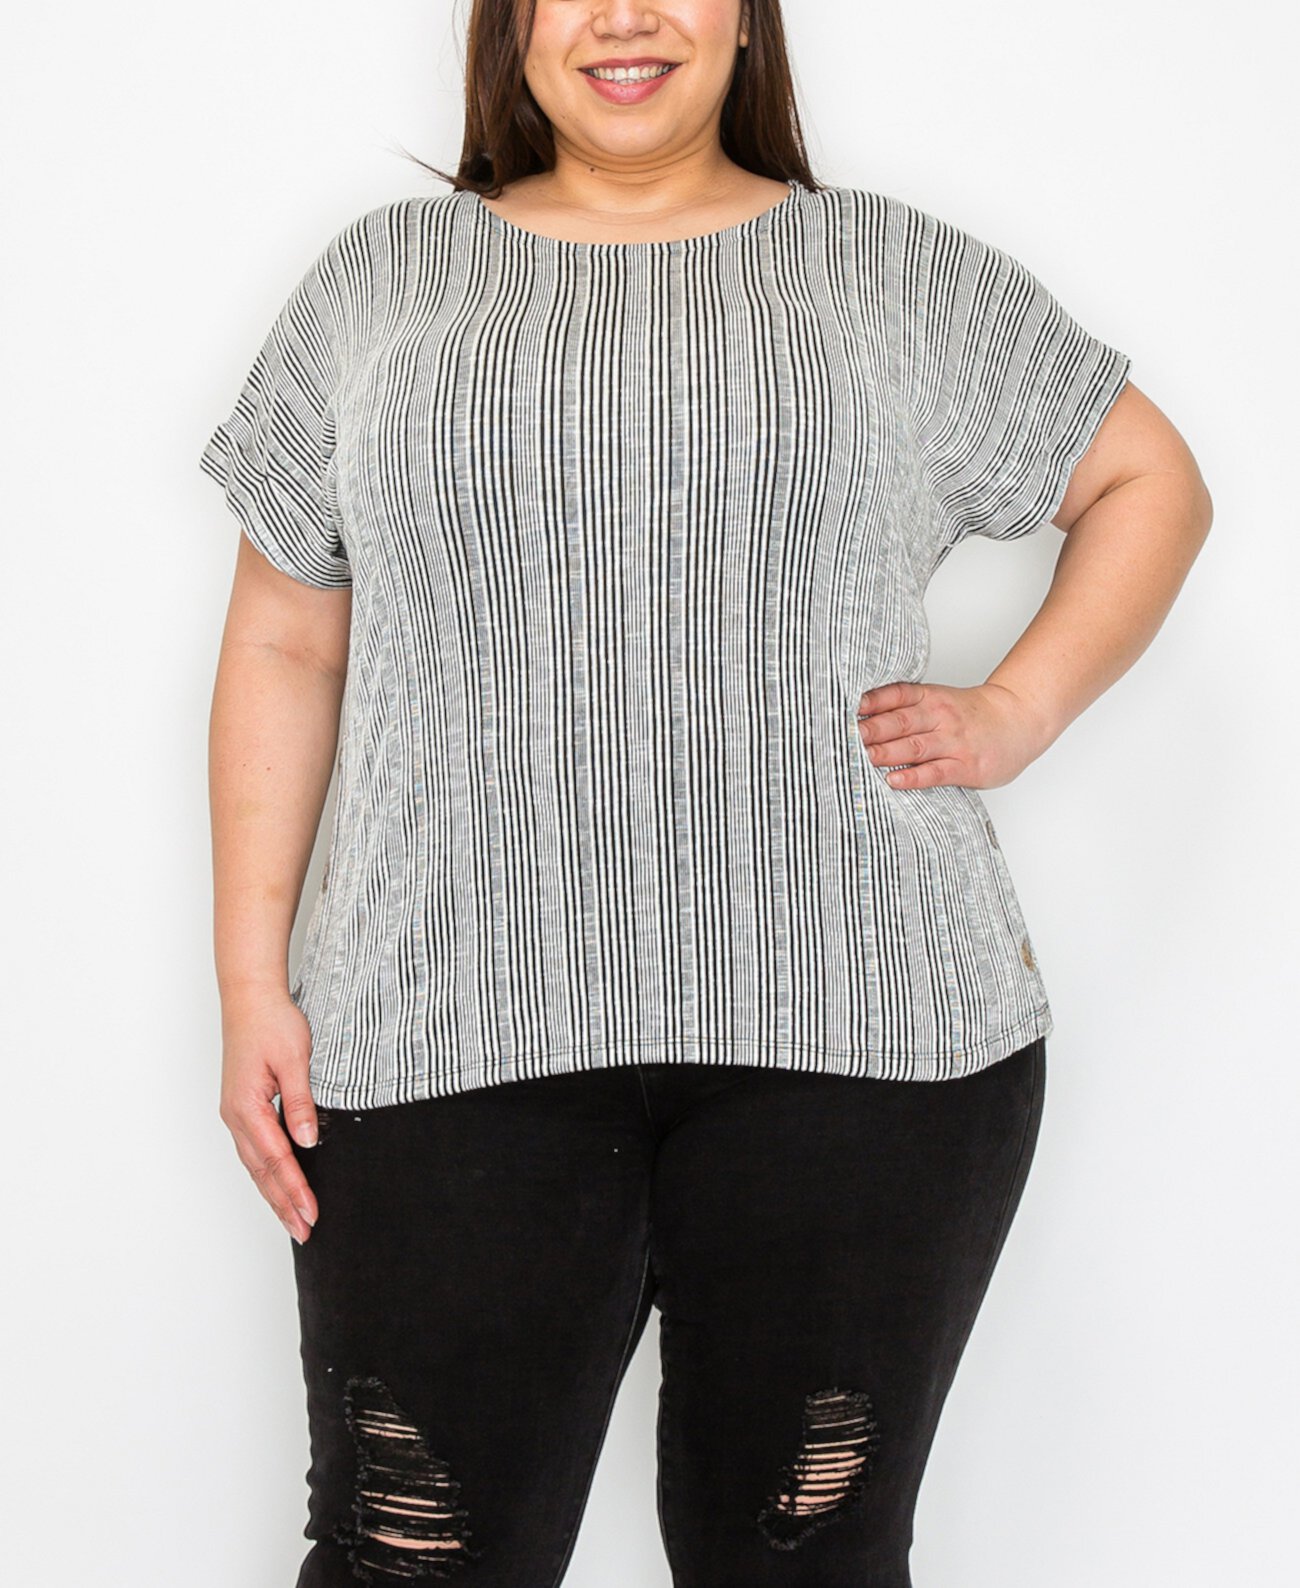 Plus Size Variegated Textured Stripe Scoopneck Top COIN 1804